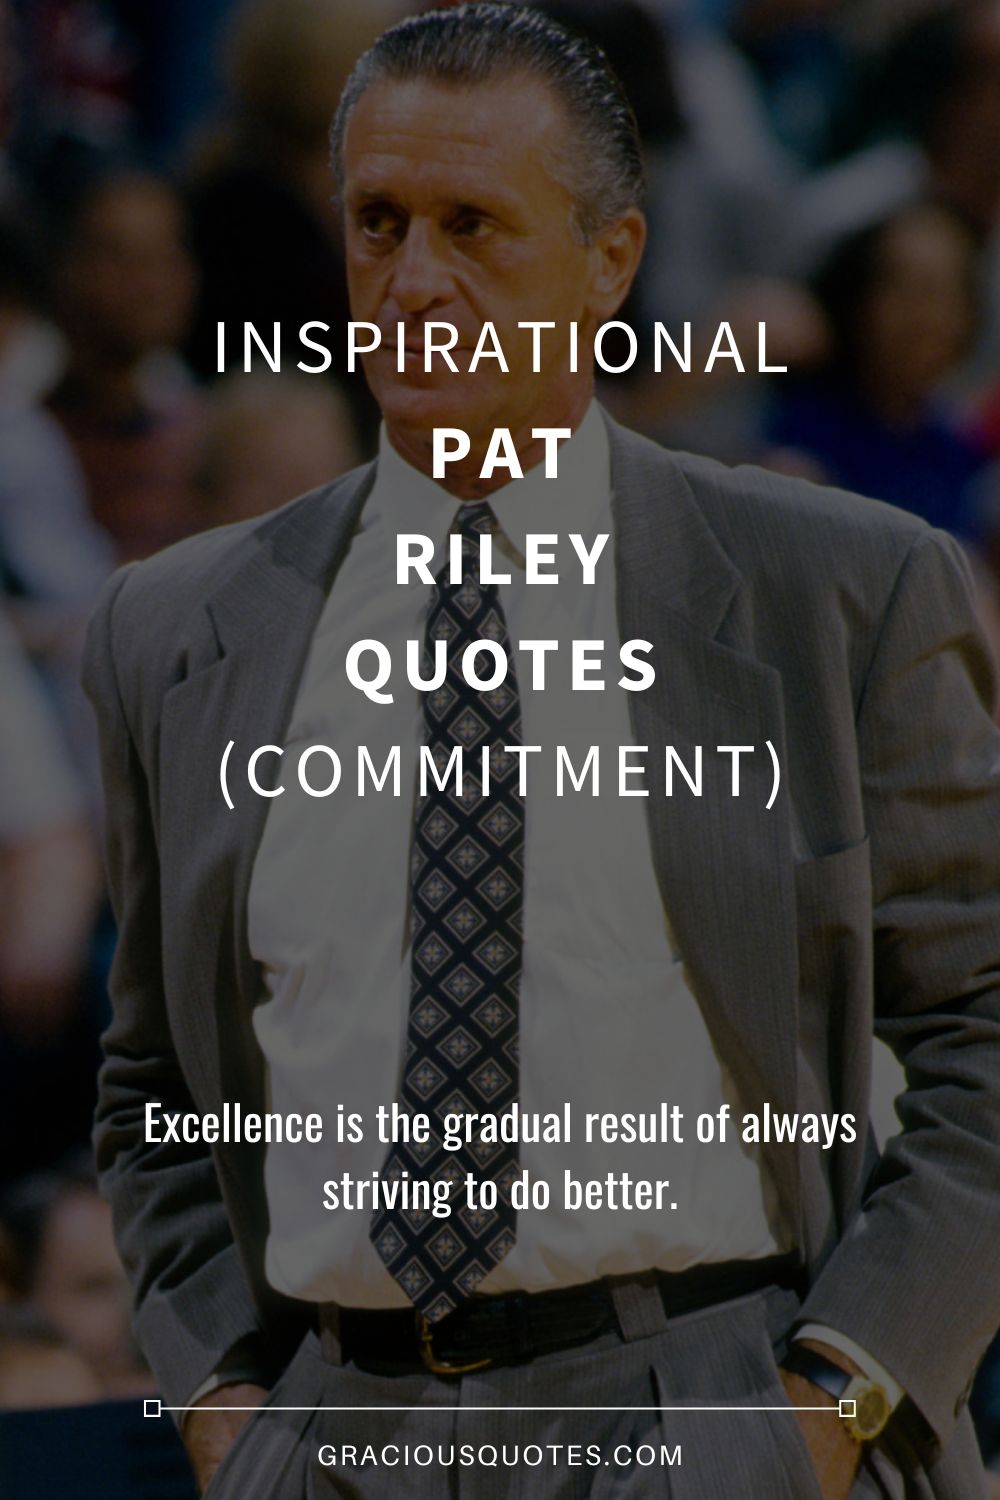 Inspirational Pat Riley Quotes (COMMITMENT) - Gracious Quotes